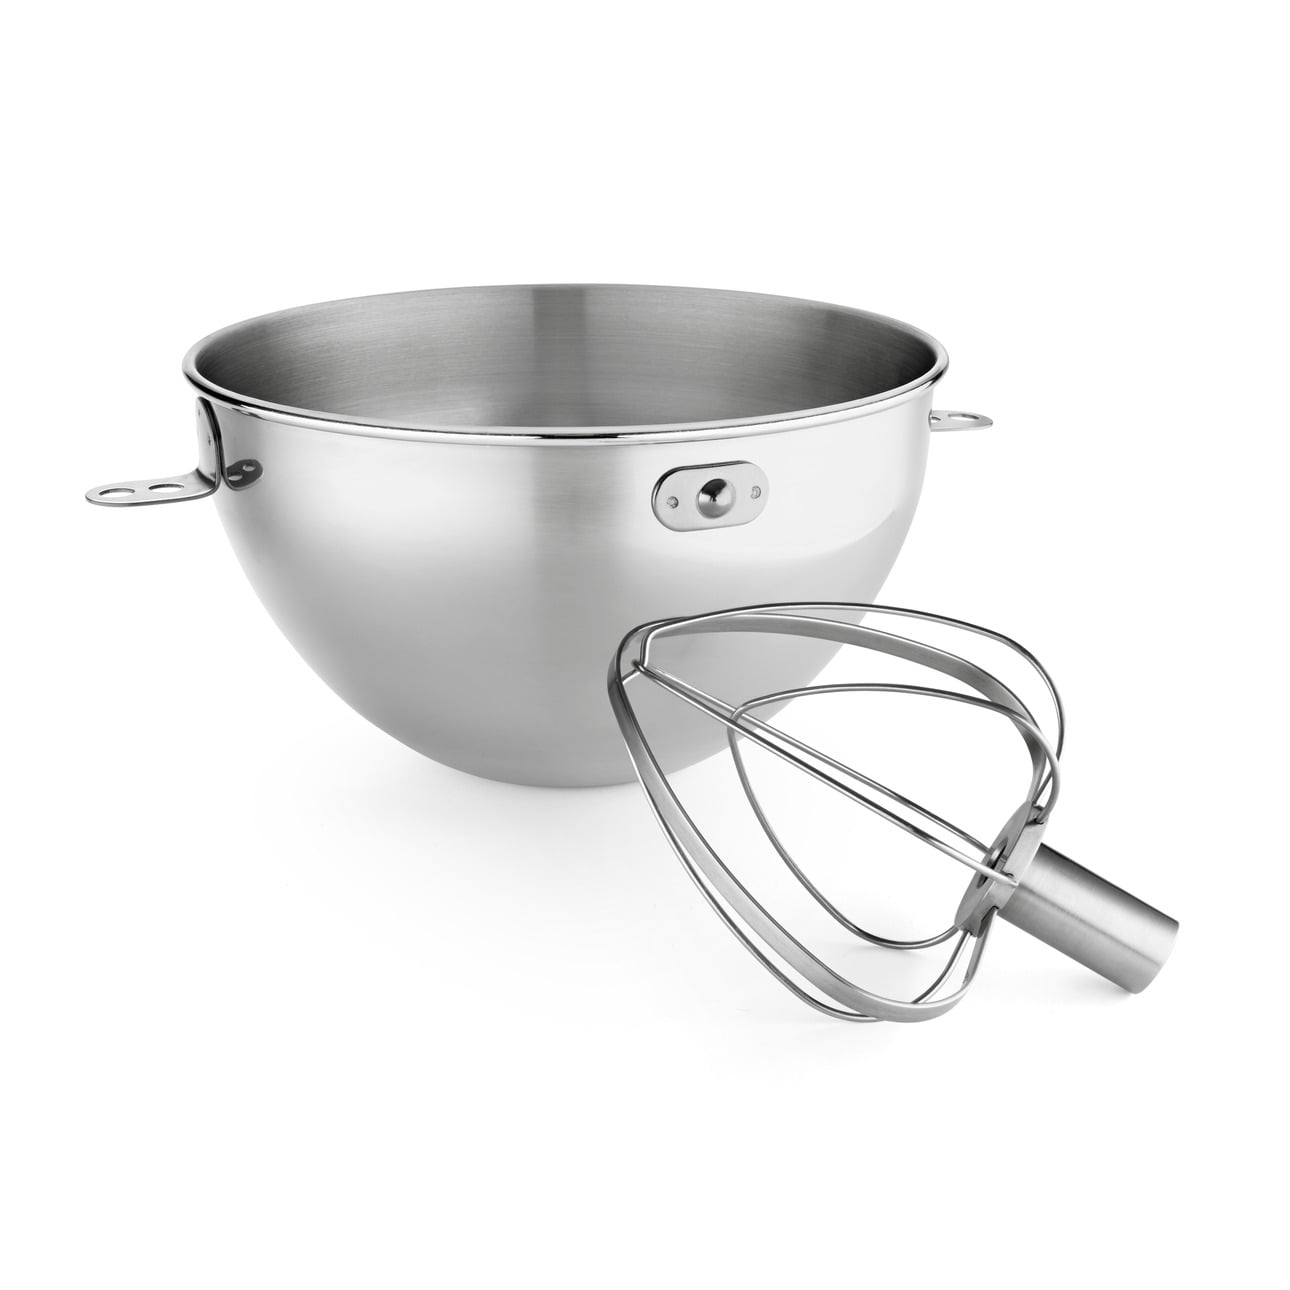 New KitchenAid Commercial 7 Qt Bowl for Stand Mixers KSMC7QBOWL Stainless Steel 